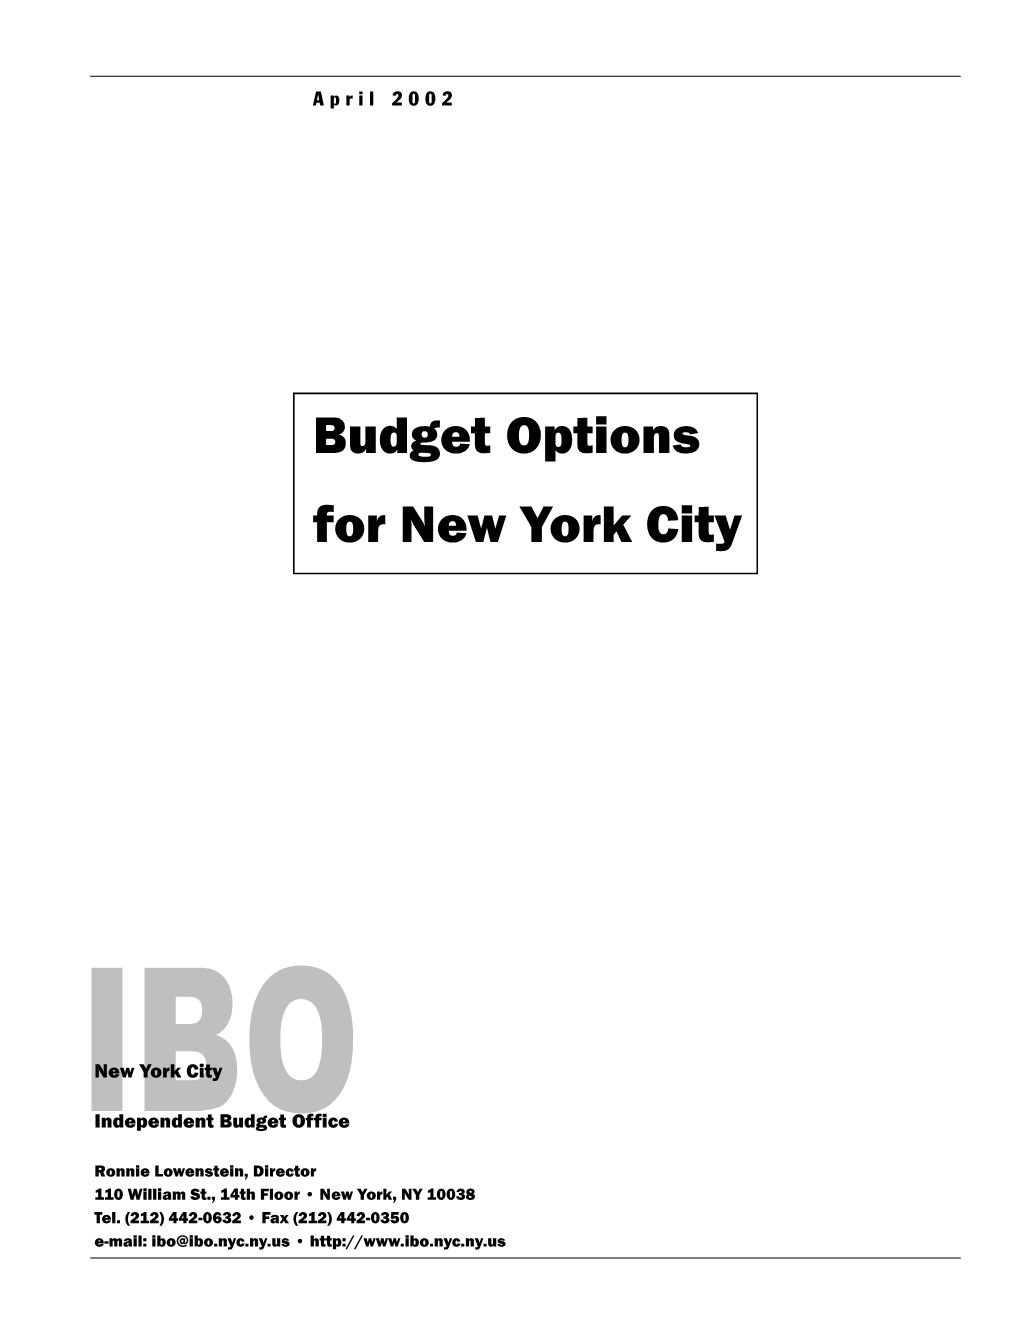 Budget Options for New York City